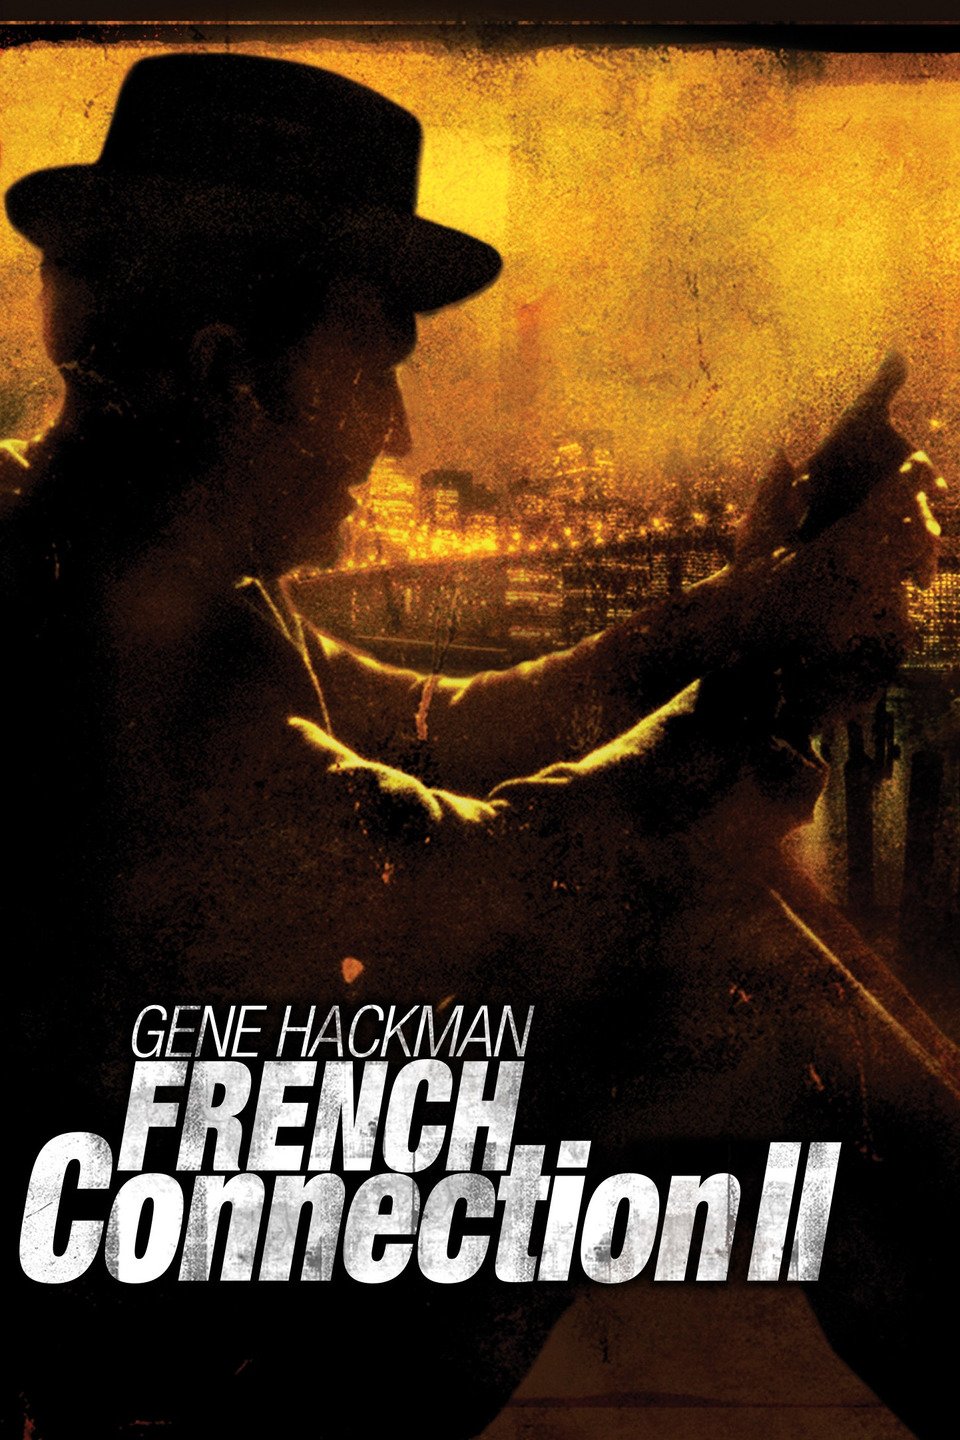 French Connection II (1975) Main Poster